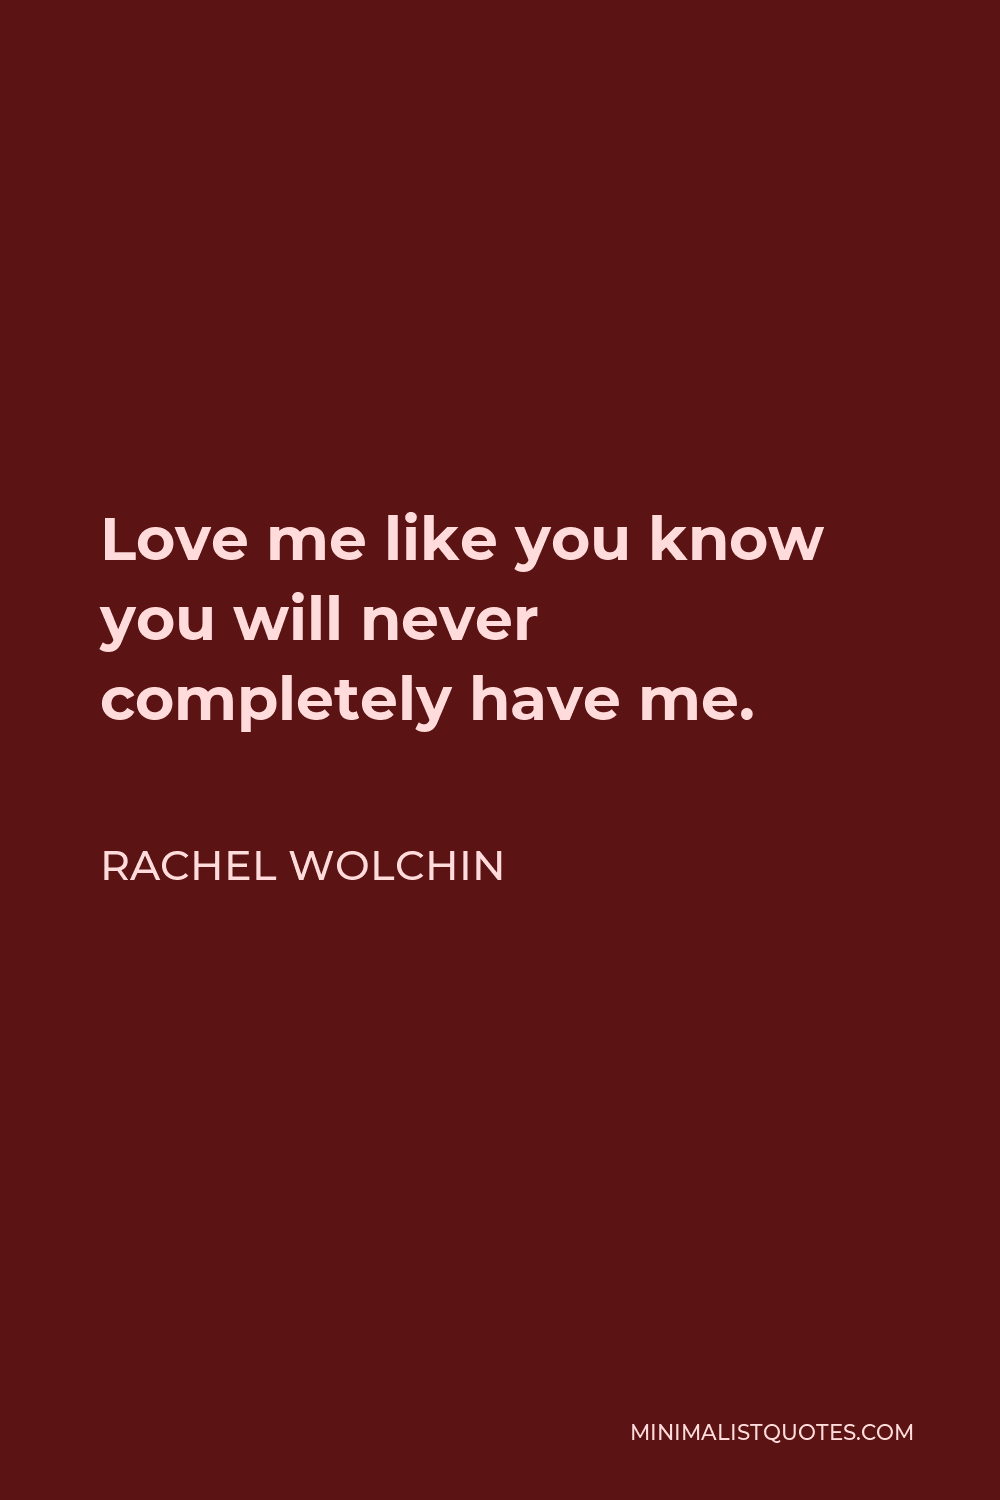 Rachel Wolchin Quote - Love me like you know you will never completely have me.